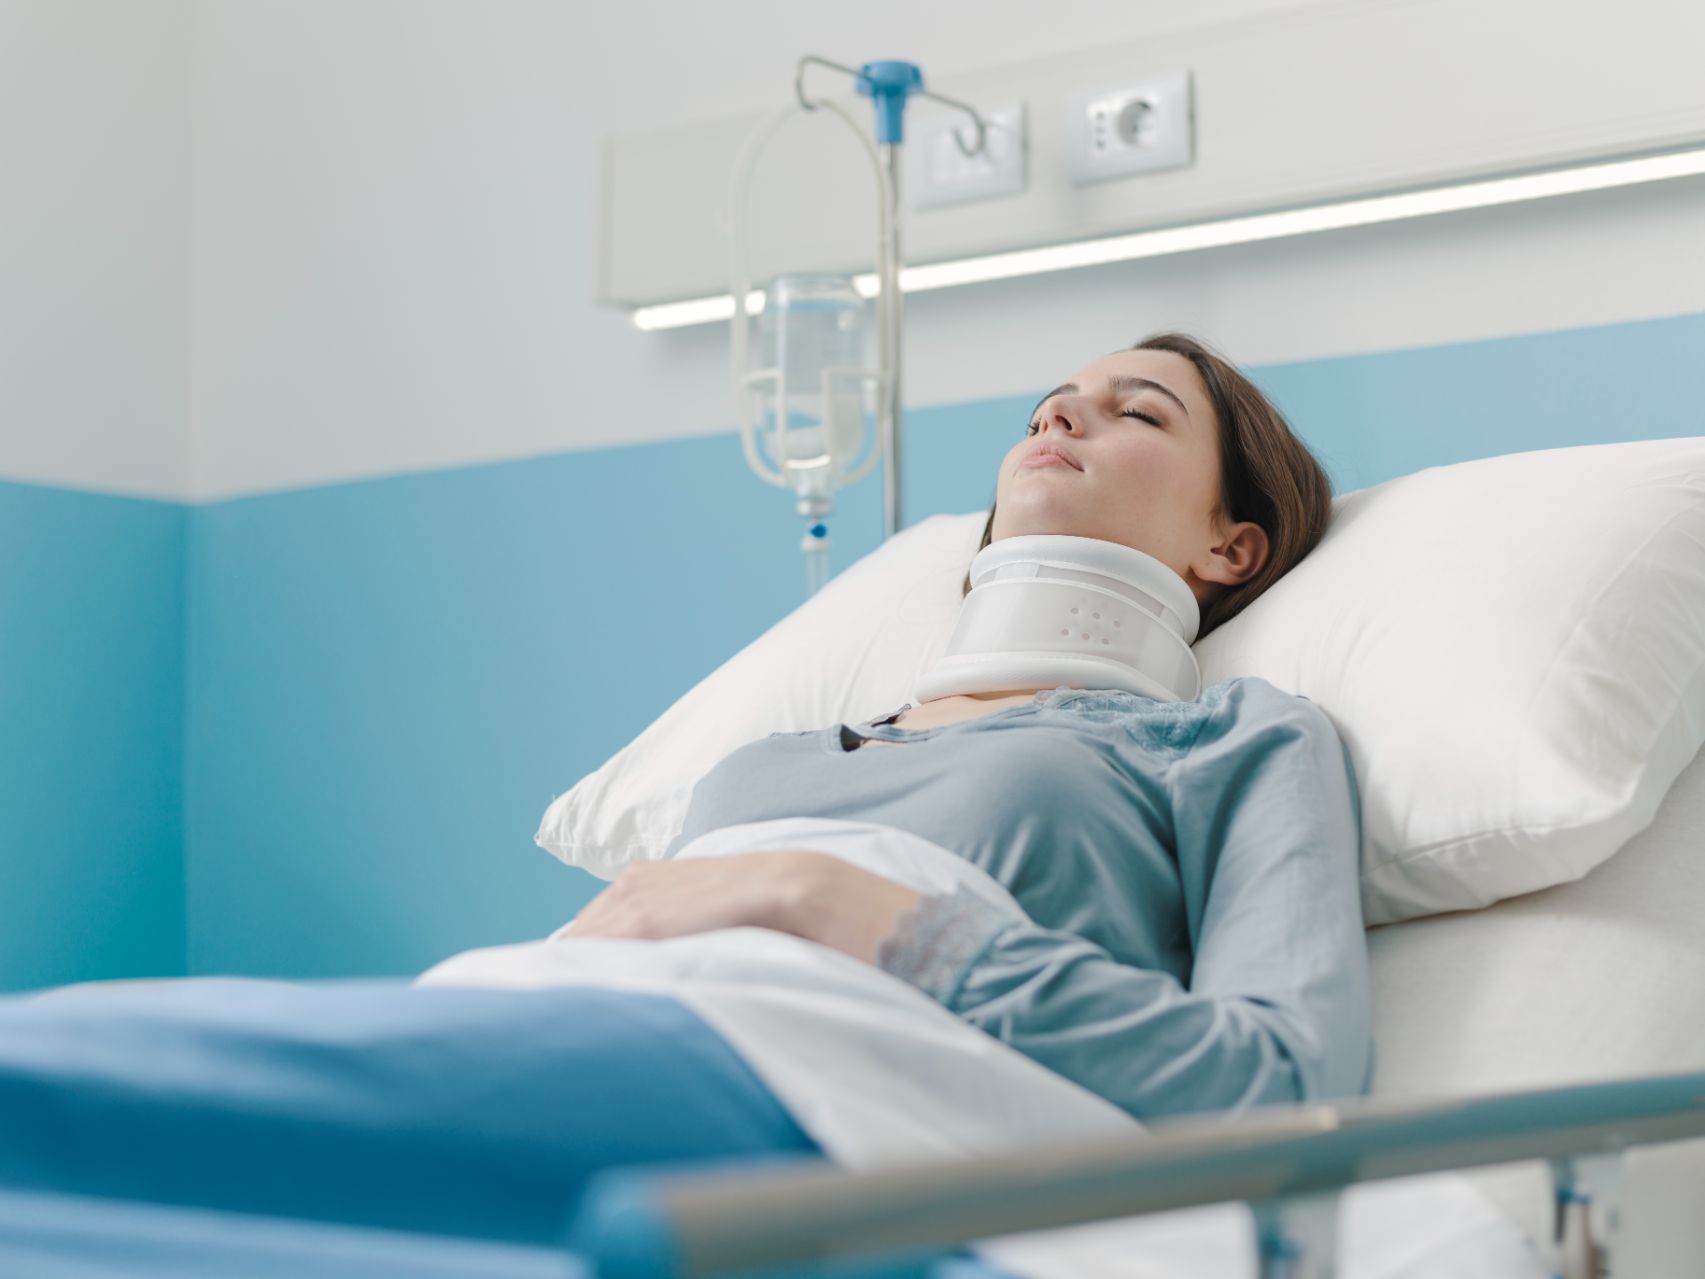 What You Need to Know About Neck Injury Symptoms After a Car Accident